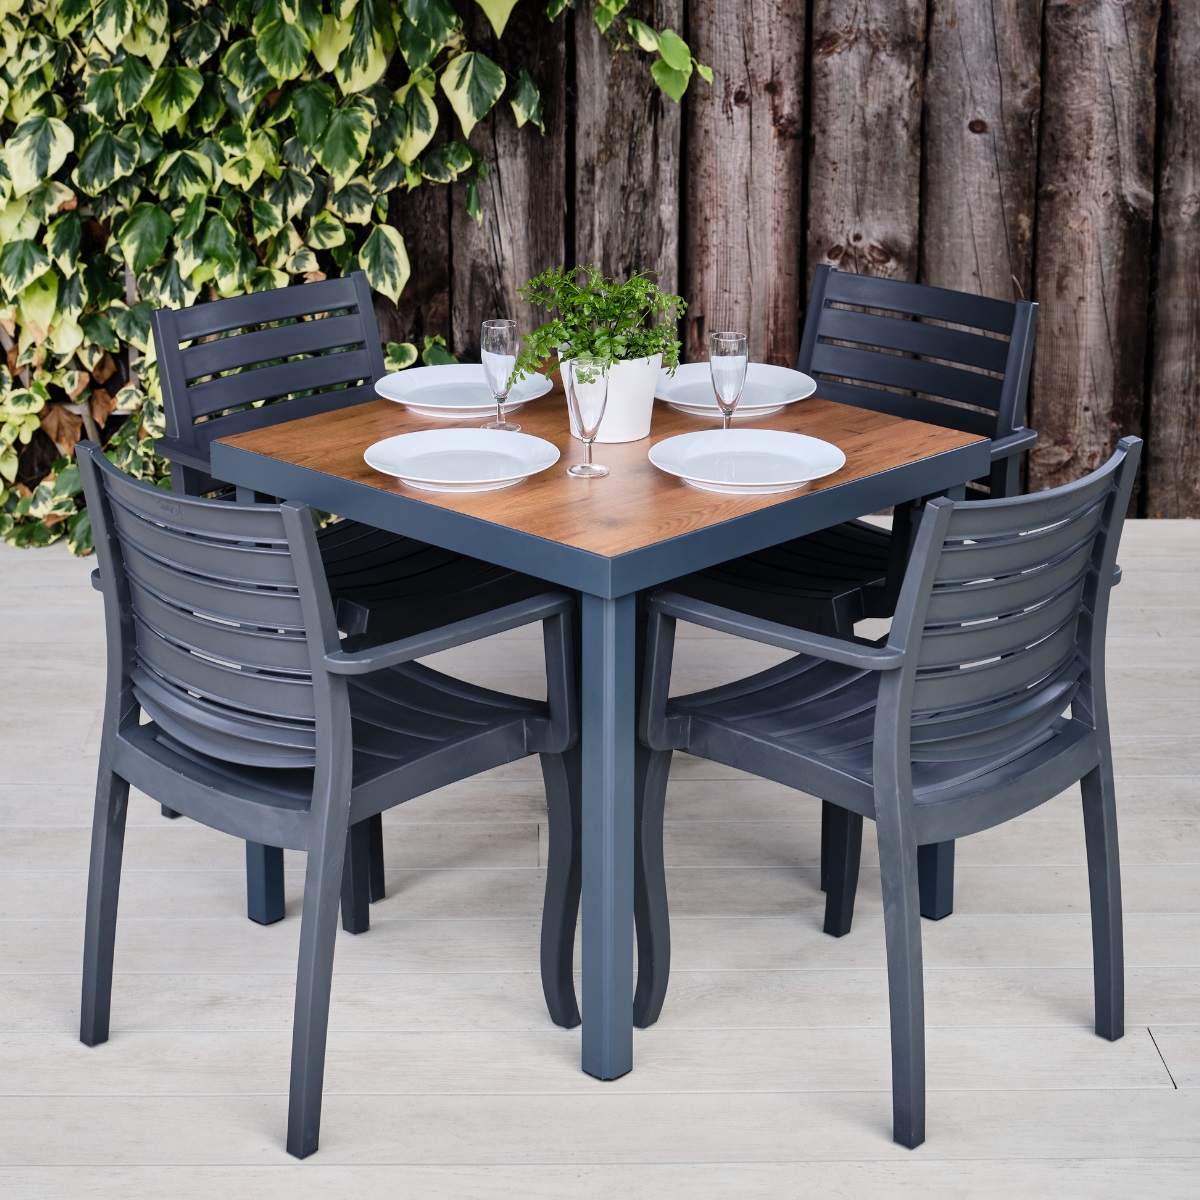 The Best Amazon Presidents' Day Outdoor Furniture Deals: Up to 50% Off Patio Furniture and More